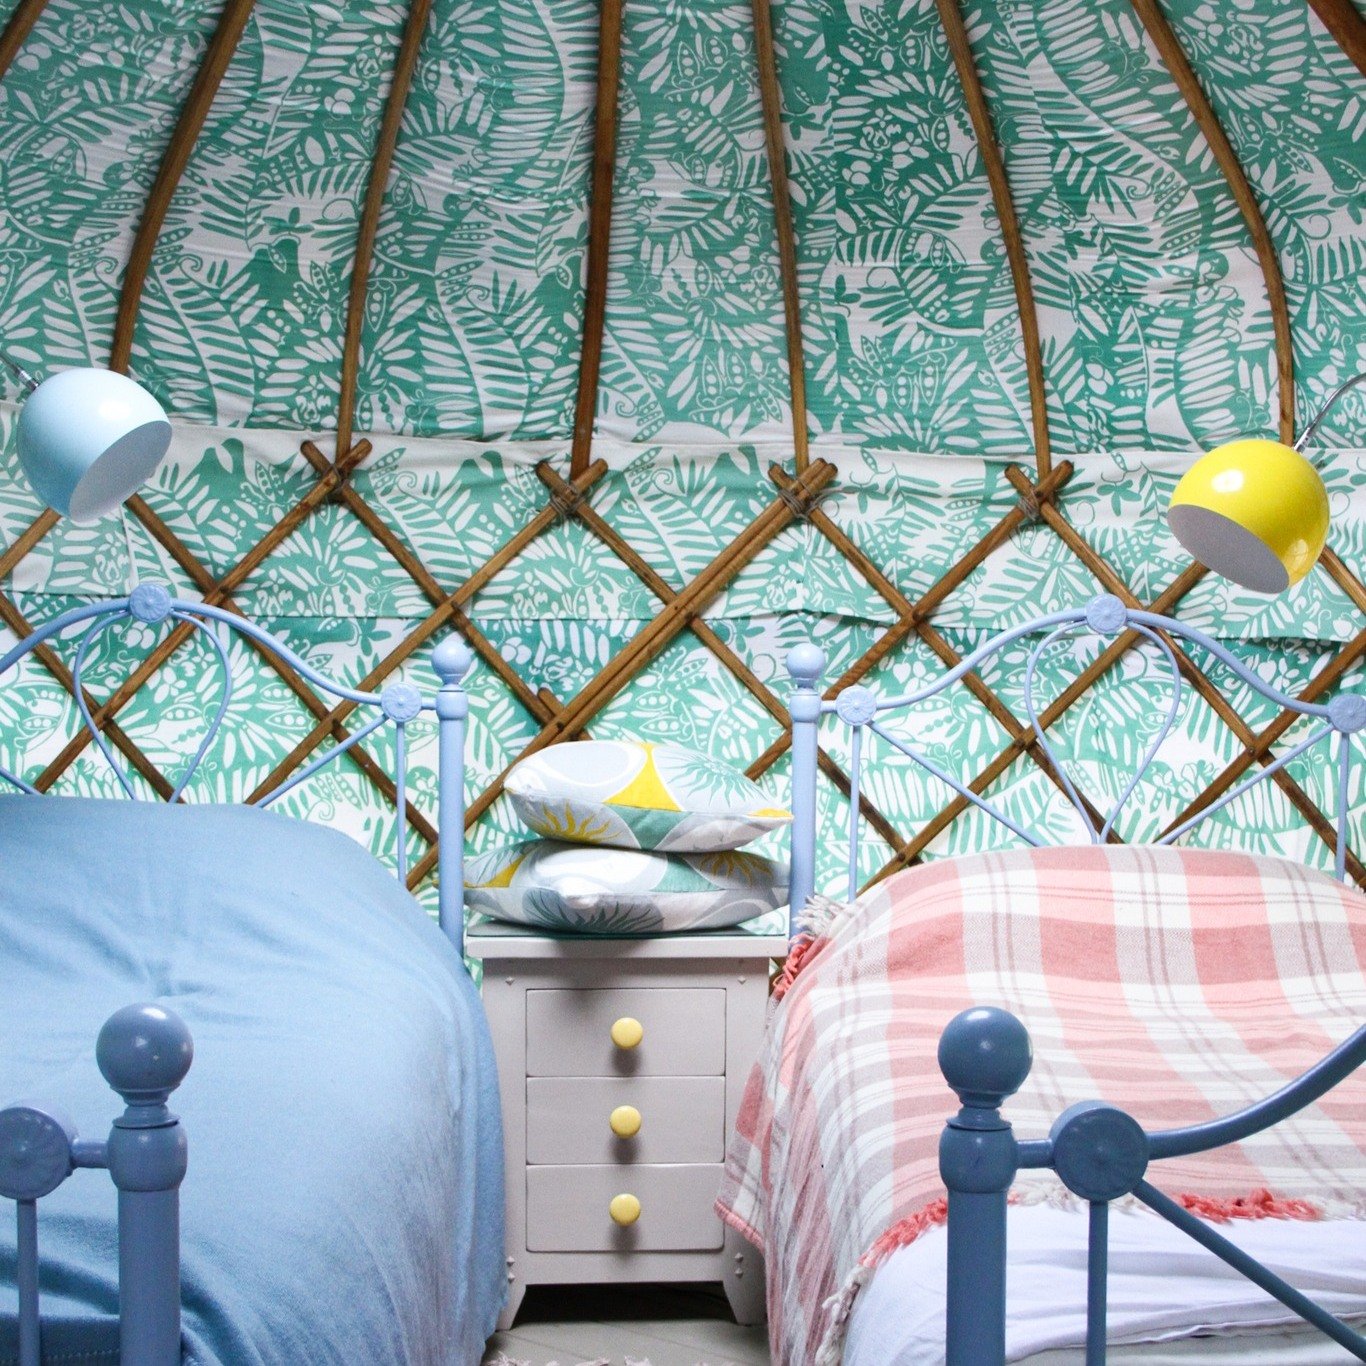 This project for @canopyandstars - the renovation of a yurt in Somerset, done by me and my amazing cousin @alicejacoby. It was a real labor of love, we wanted everything to be made from recycled materials. From painted furniture to quilts made from s